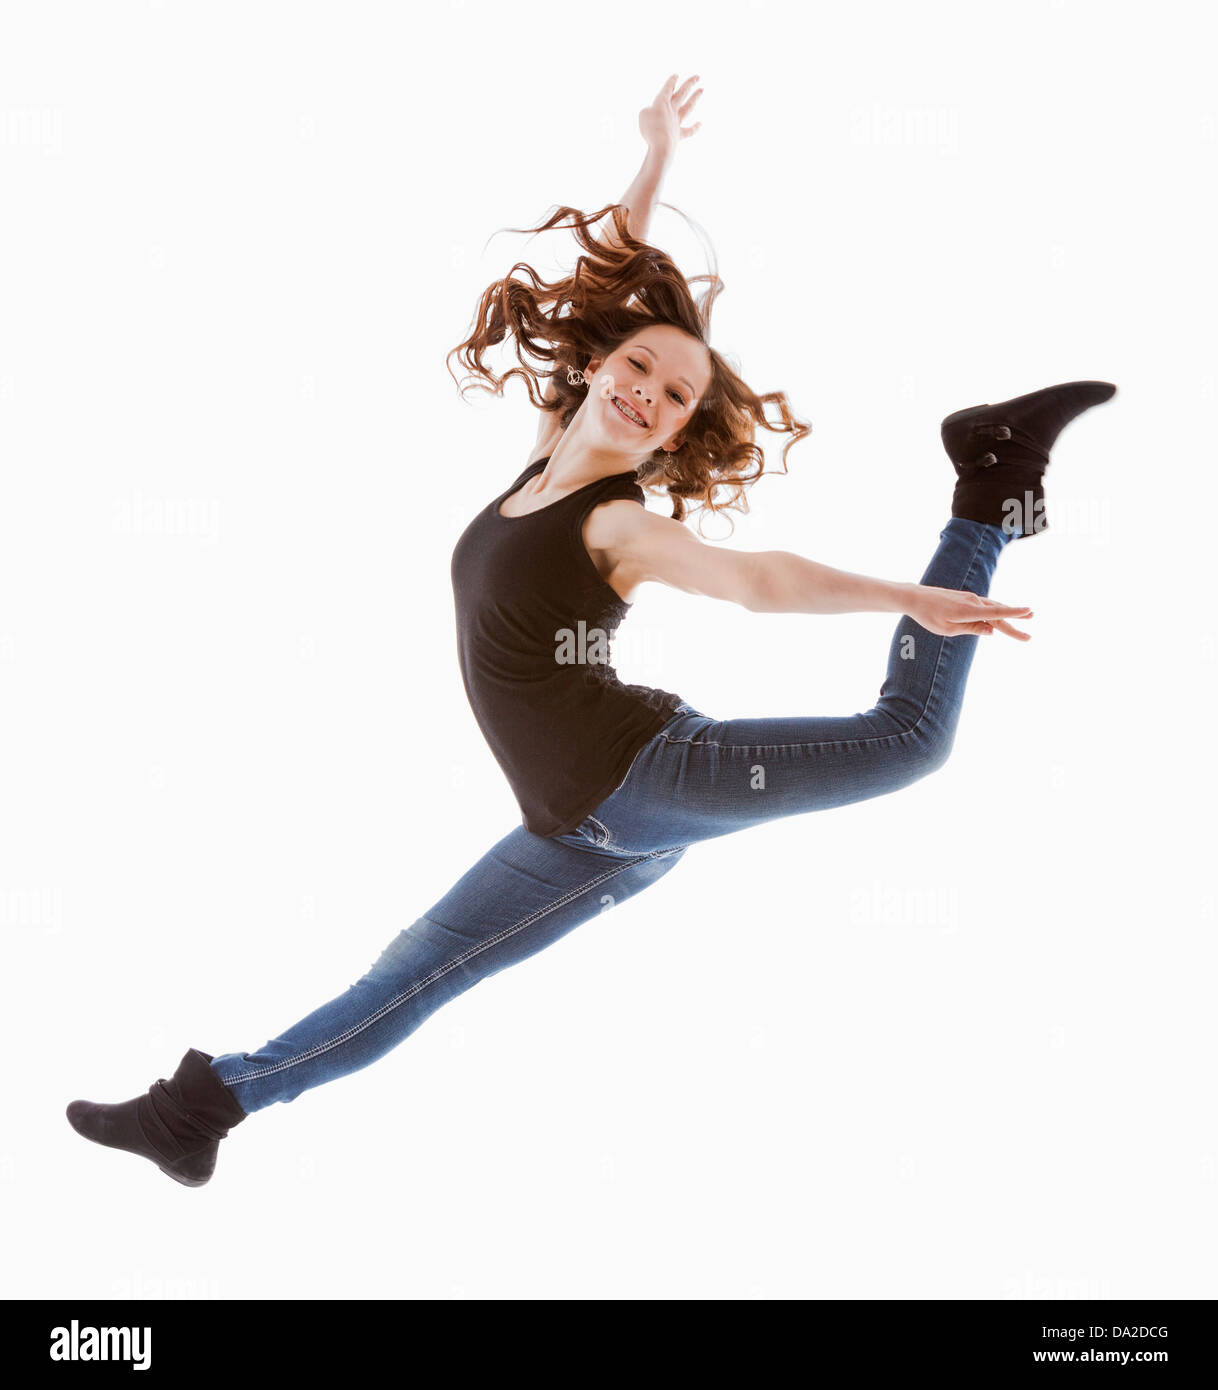 Portrait of jumping girl (12-13) Stock Photo